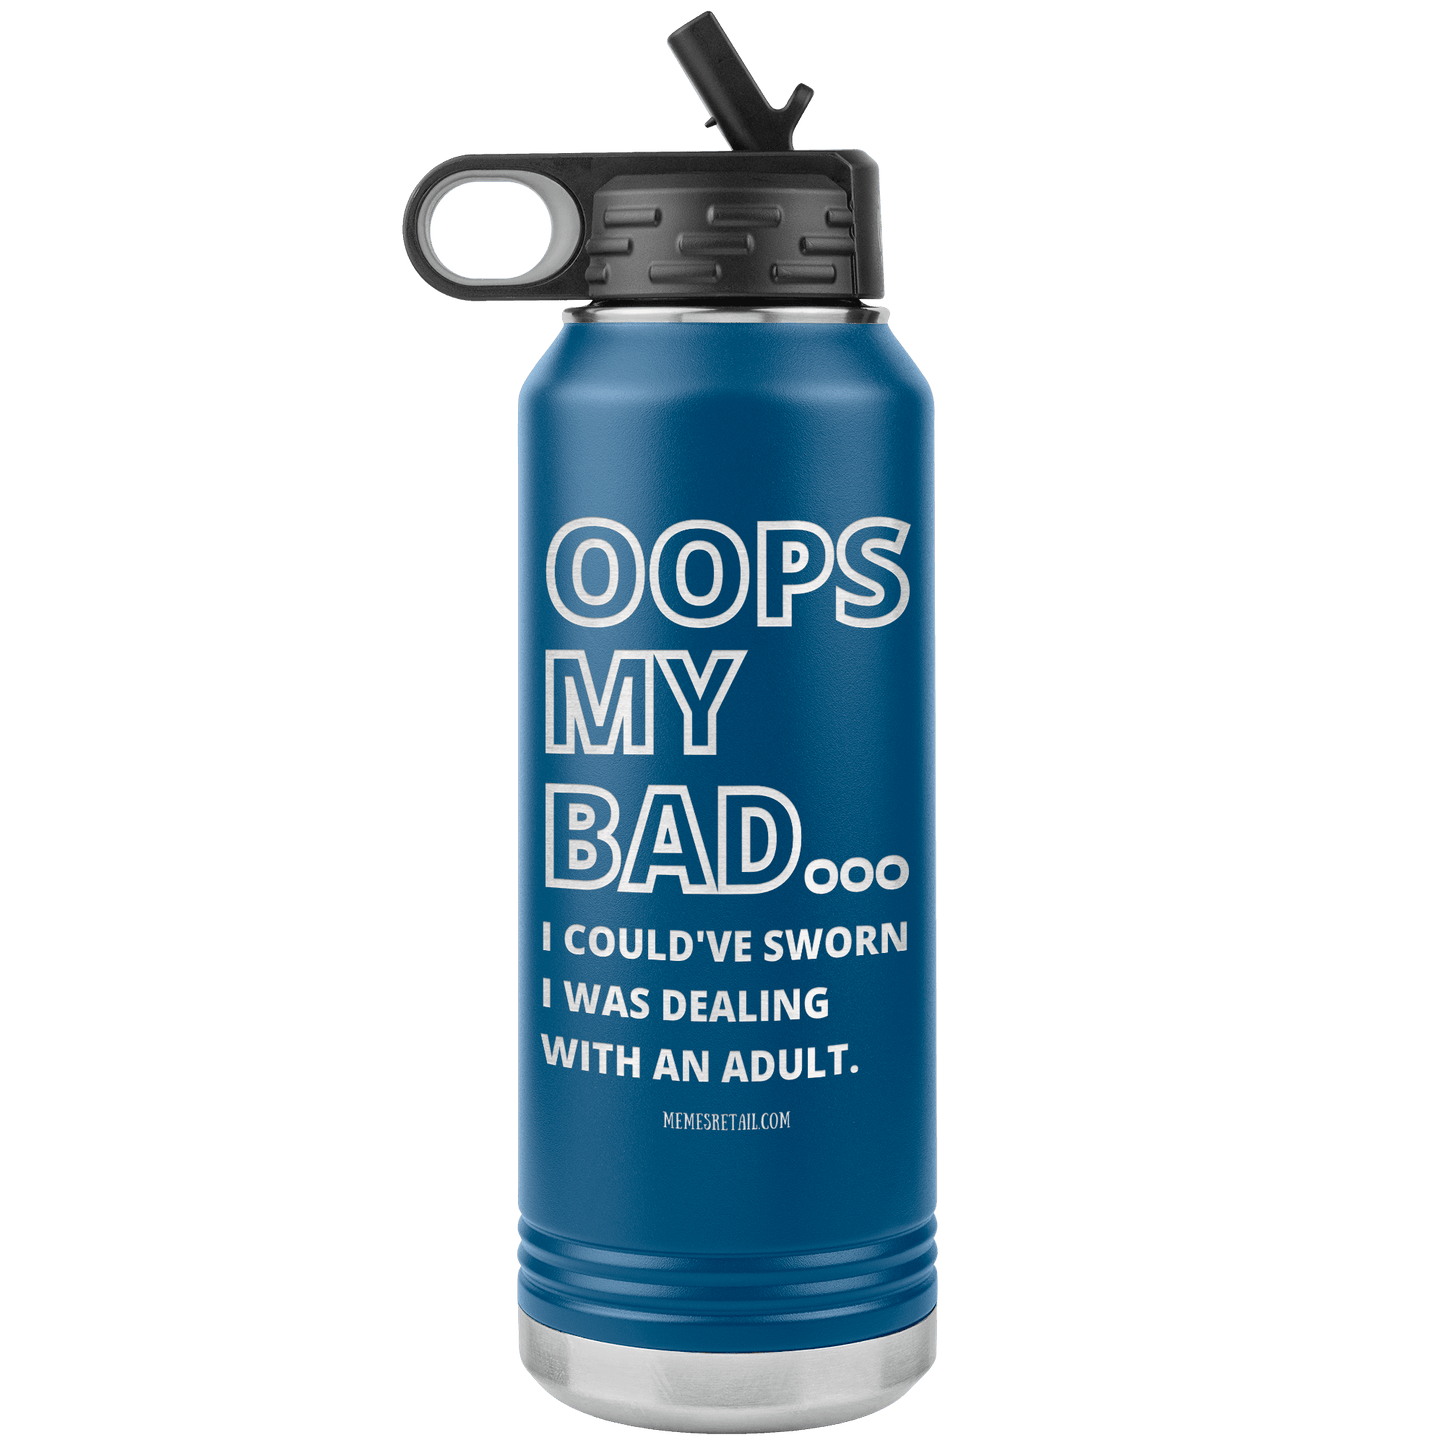 OOPS My bad...i could've sworn i was talking with an adult 32 oz Water Tumbler, Blue - MemesRetail.com